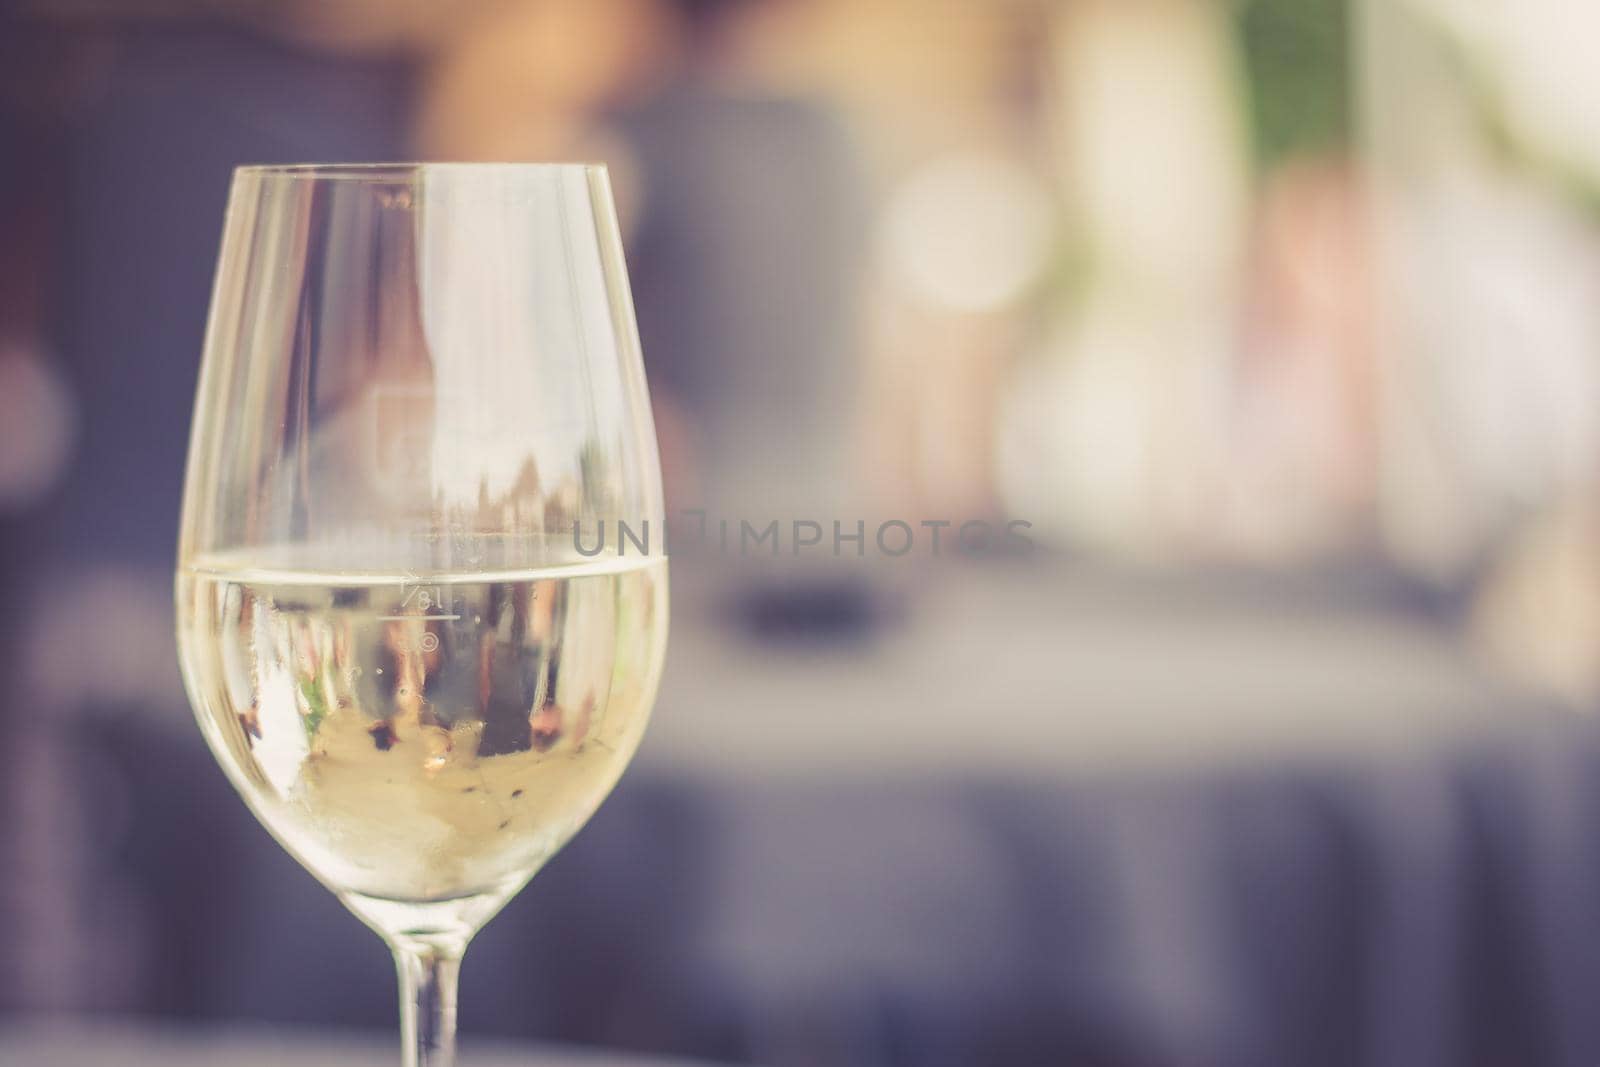 Cut out of a glass with white wine, summer time